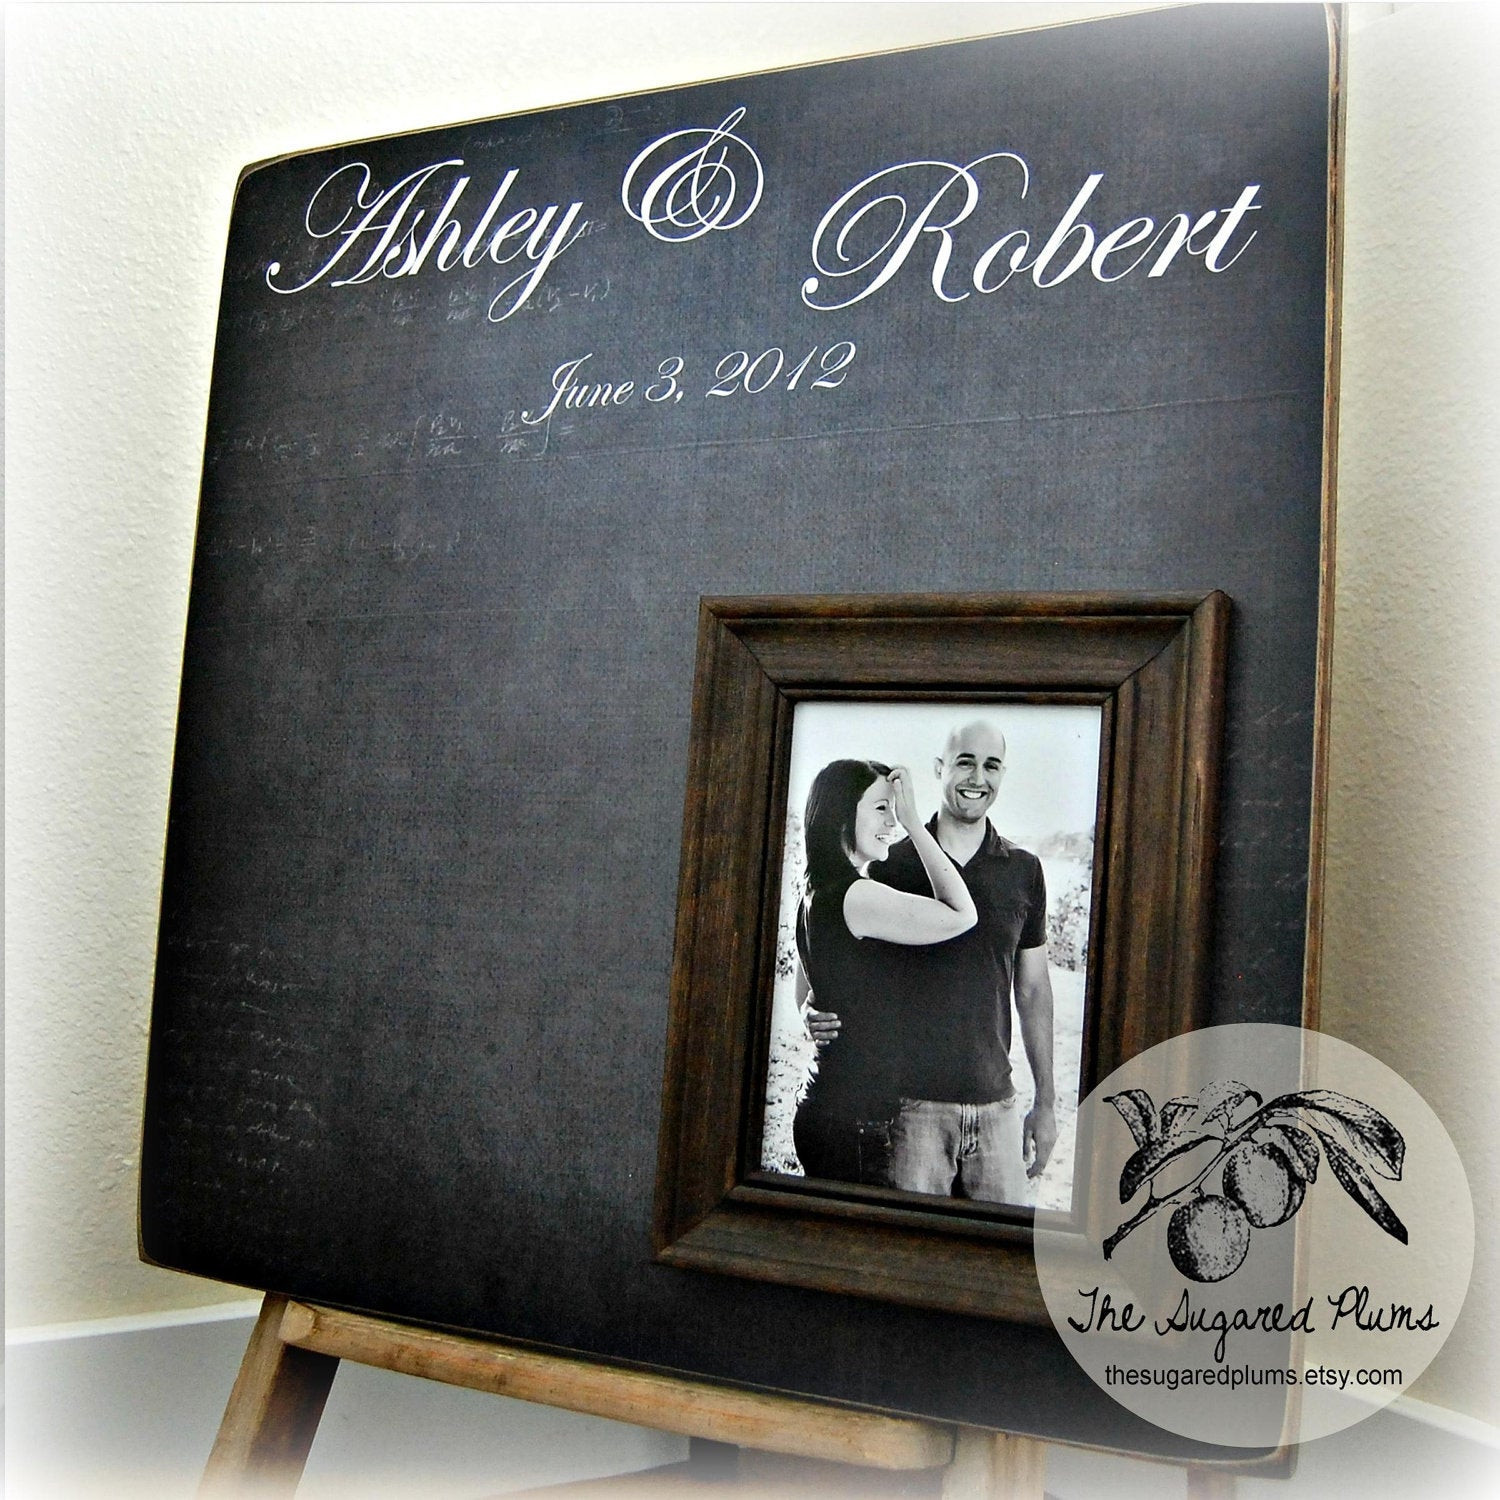 Wedding Guest Book Personalised
 Personalized WEDDING GUEST BOOK Unique Wedding Guest Book